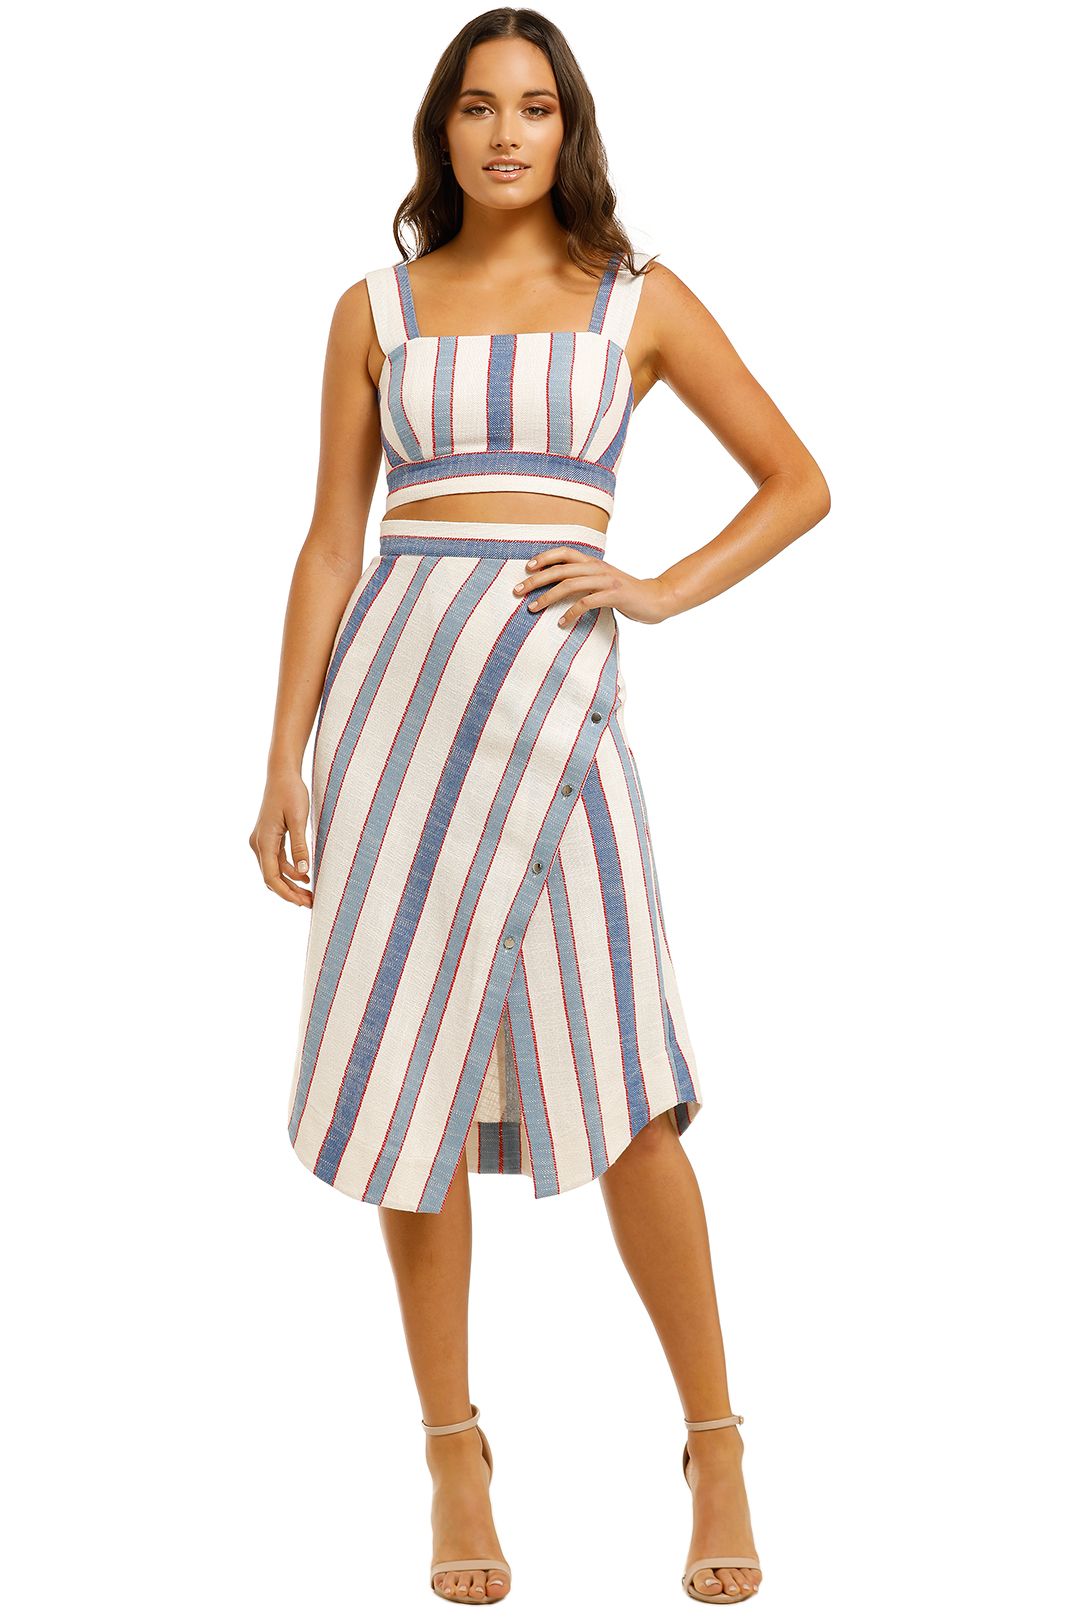 Lover-Marrakech-Crop-Top-and-Skirt-Set-Blue-Ivory-Front